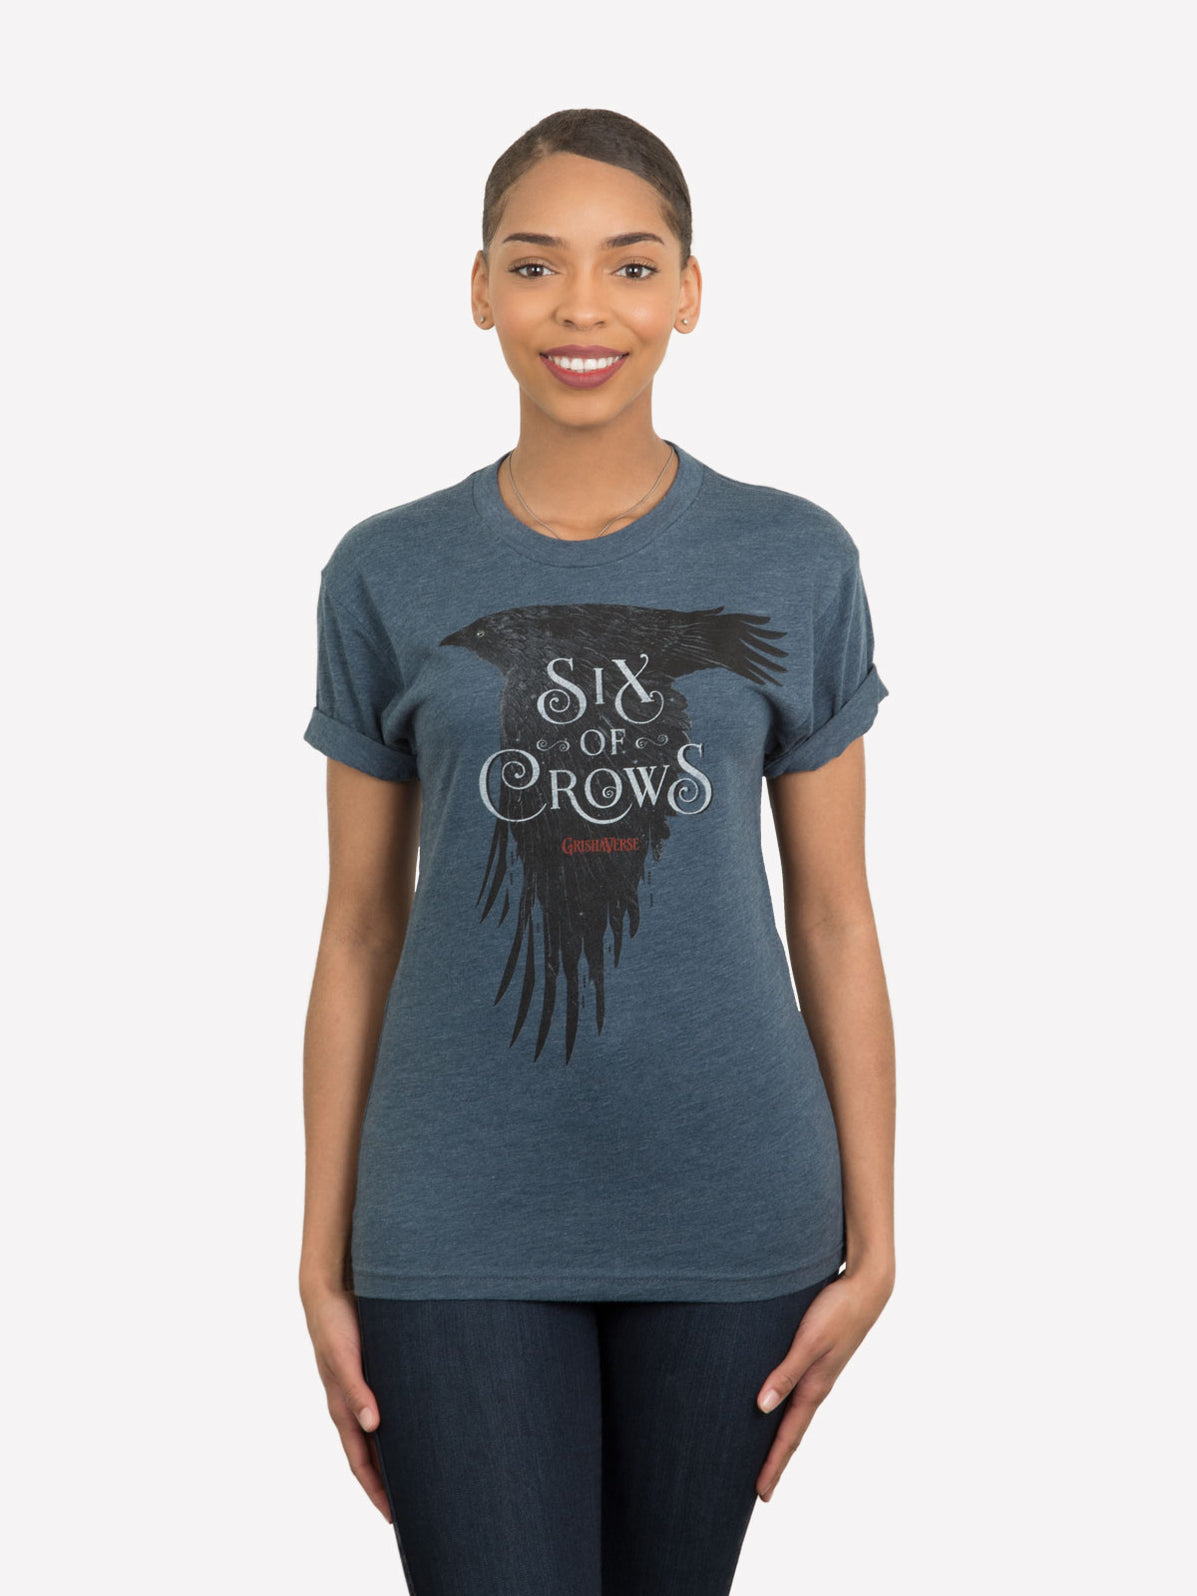 Six of Crows unisex book t-shirt — Out of Print